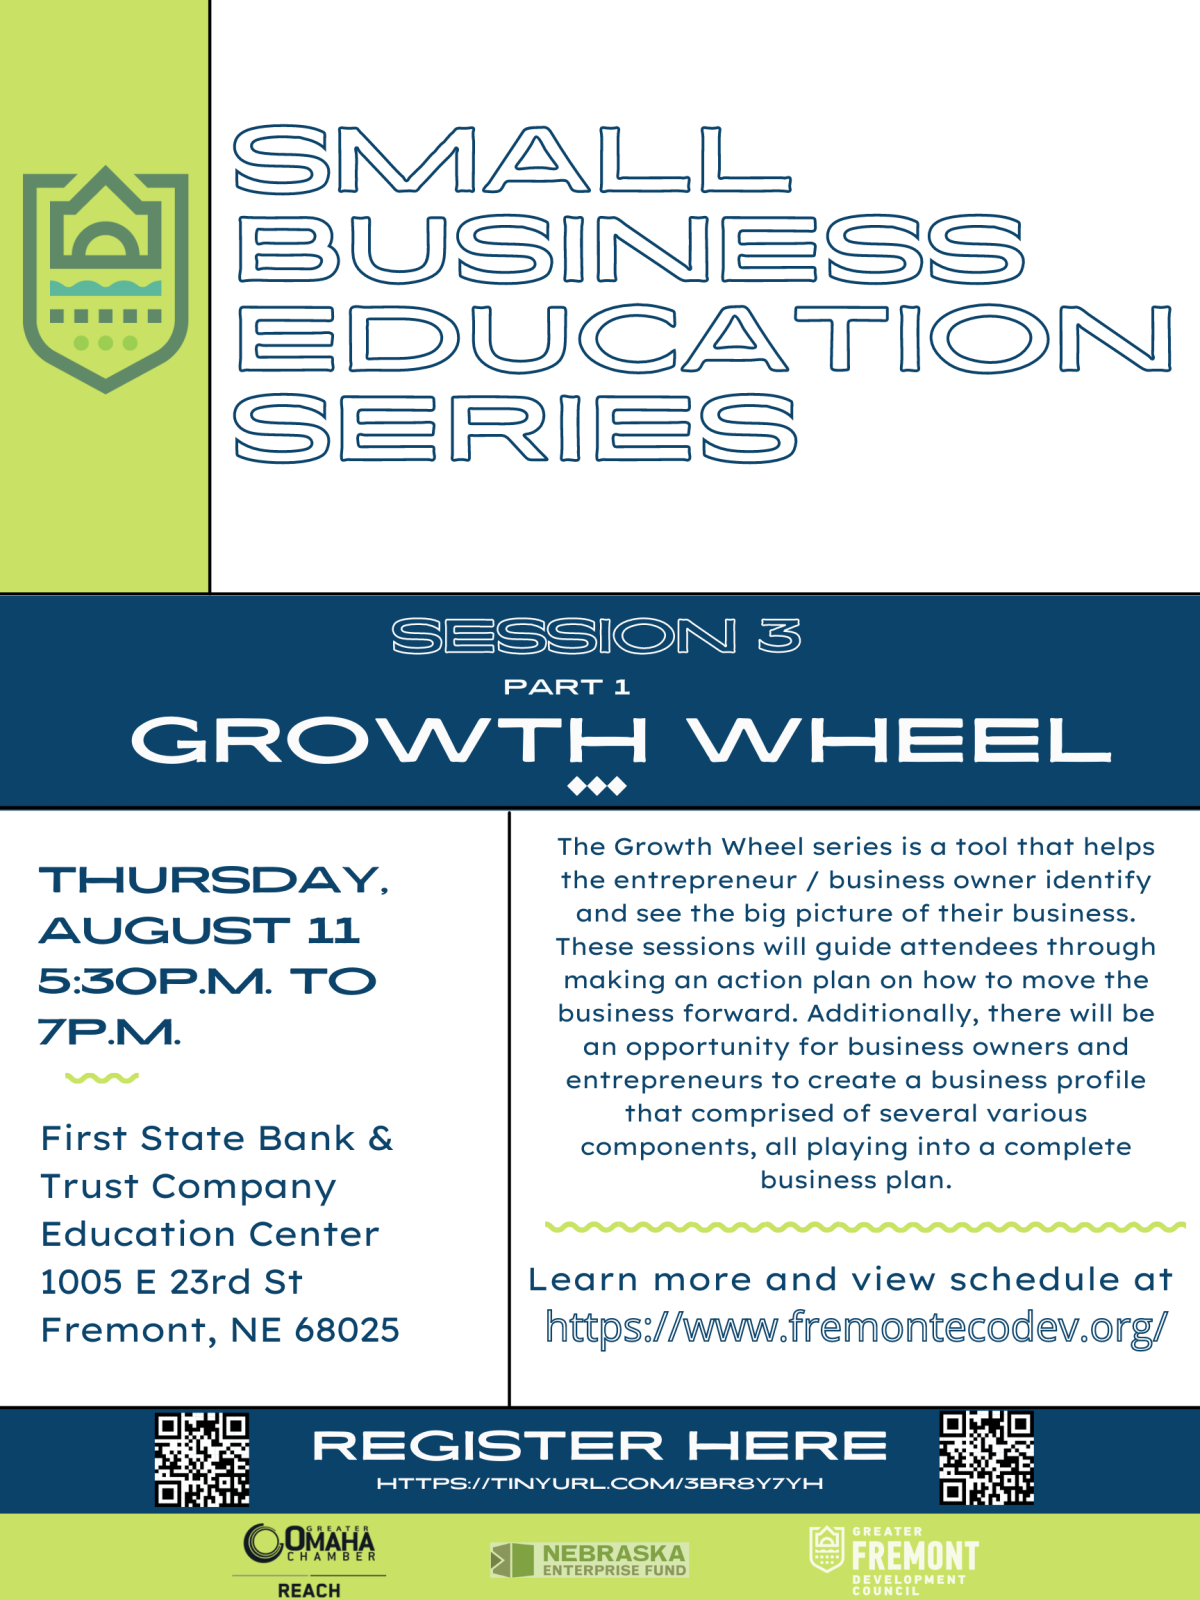 The Next Two Sessions of the Small Business Education Series from the Greater Fremont Development Council (GFDC) to Focus on the Growth Wheel Photo